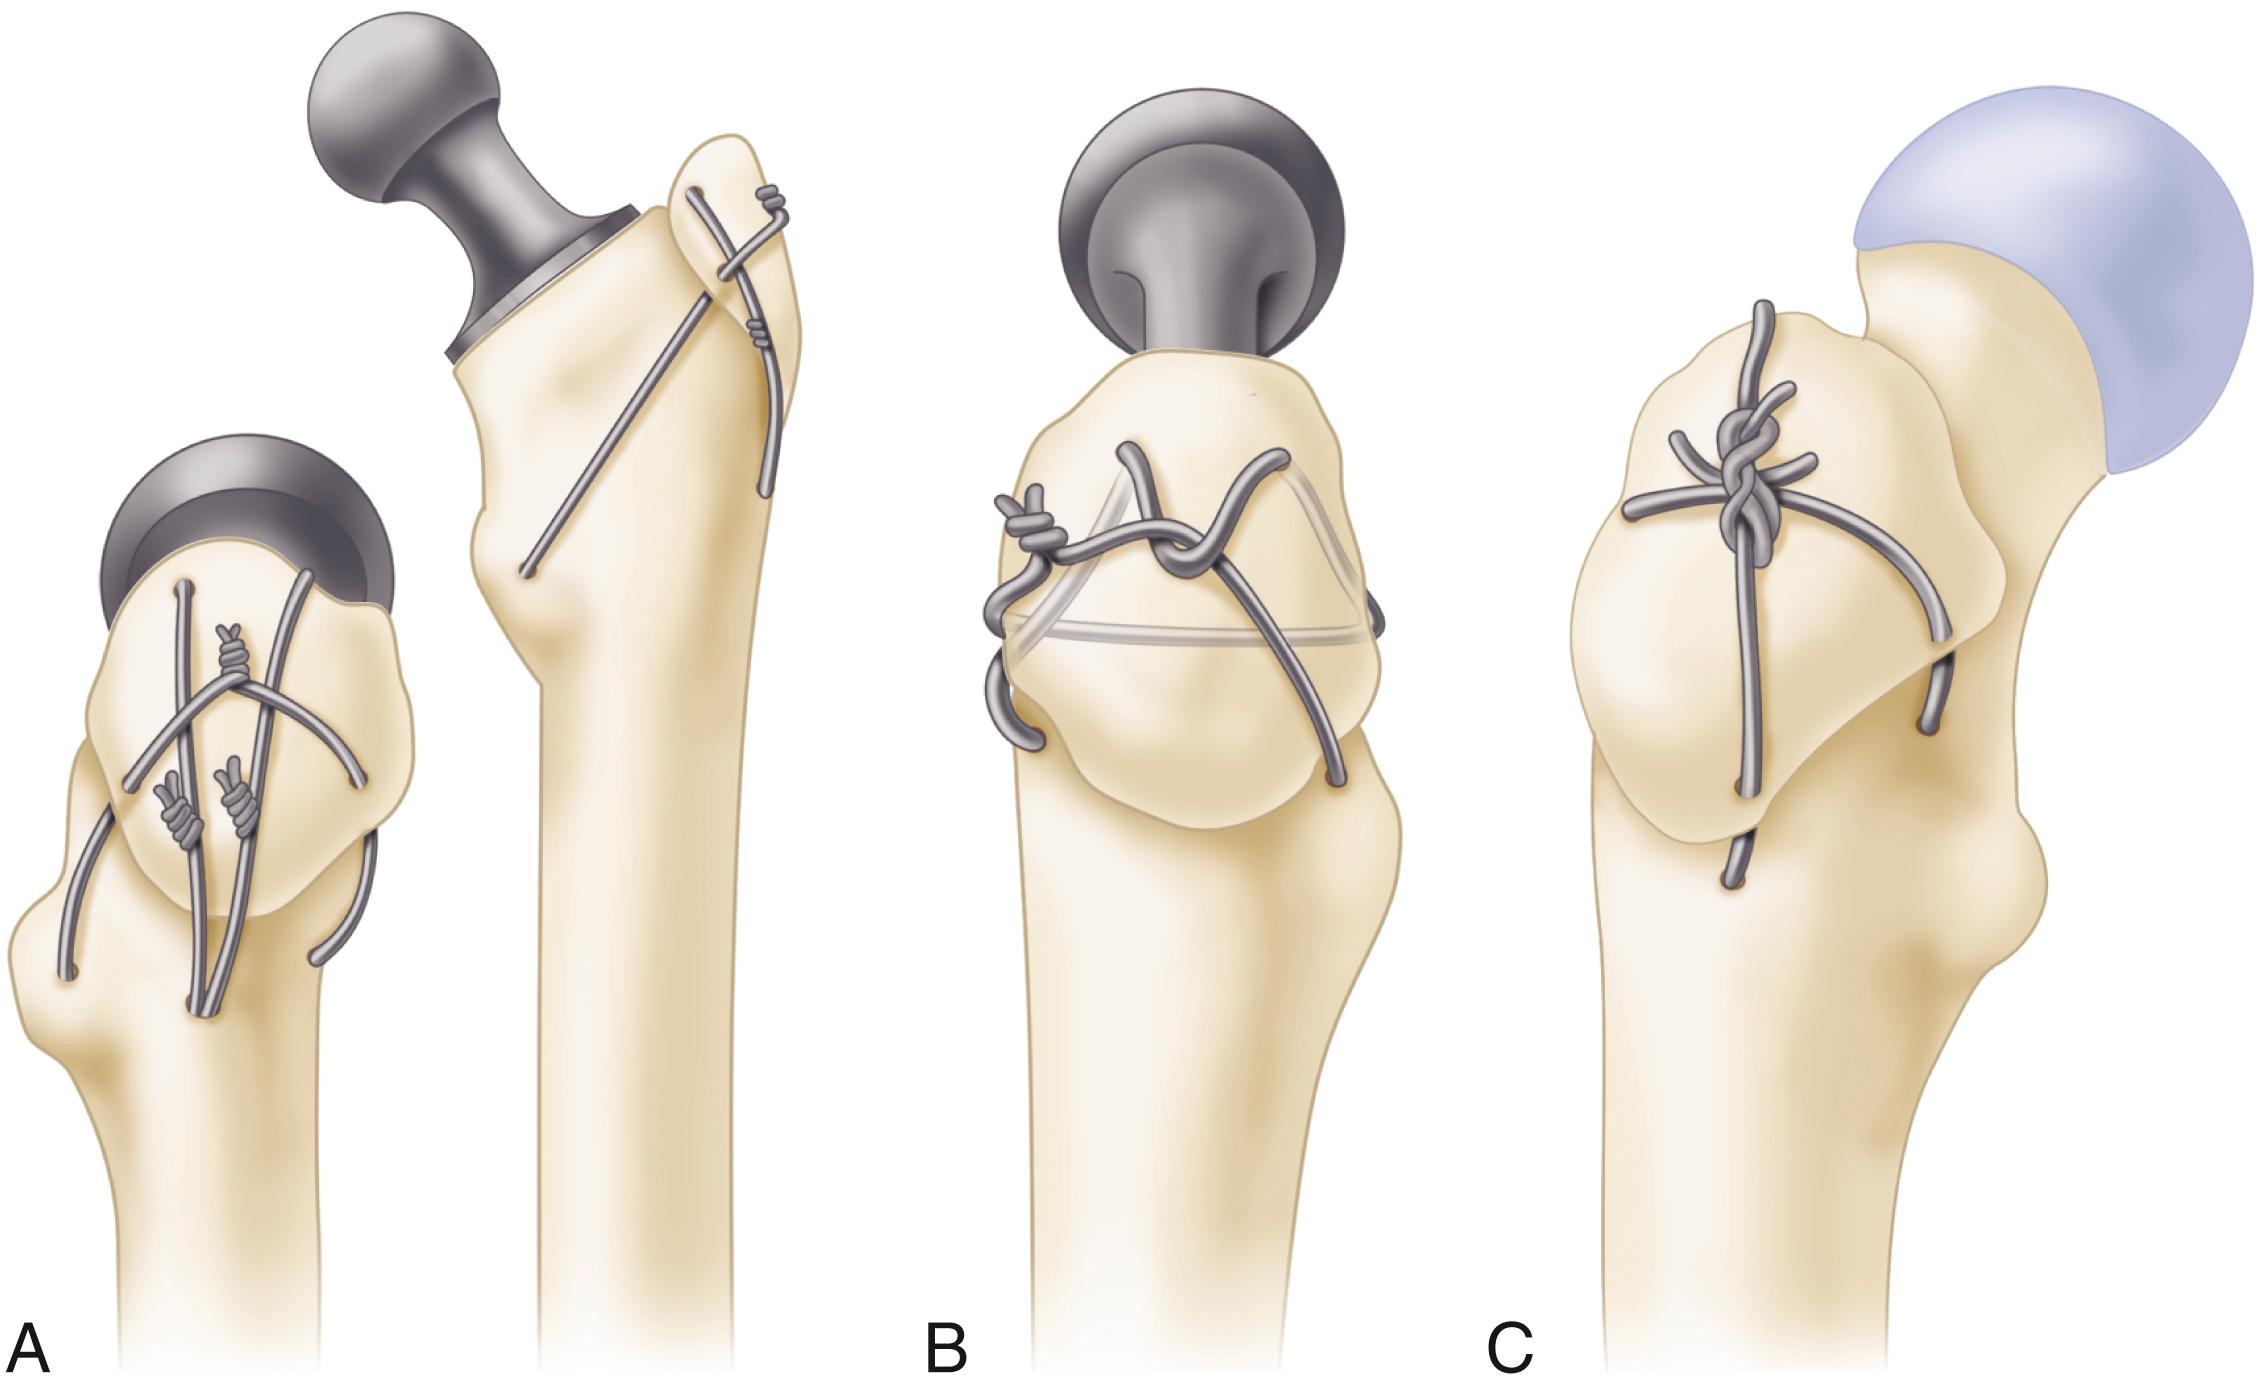 FIGURE 3.74, Wire fixation of trochanter. A, Two vertical wires are inserted in hole drilled in lateral cortex below abductor tubercle; they emerge from cut surface of neck, and one is inserted in hole in osteotomized trochanter. Two vertical wires are tightened and twisted, and transverse wire that was inserted in hole drilled in lesser trochanter and two holes in osteotomized trochanter is tightened and twisted. B, One-wire technique of Coventry. After component has been cemented in femur, two anteroposterior holes are drilled in femur beneath osteotomized surface and two holes are drilled in osteotomized trochanter. One end of wire is inserted through lateral loop before being tightened and twisted. C, Oblique interlocking wire technique of Amstutz for surface replacement.